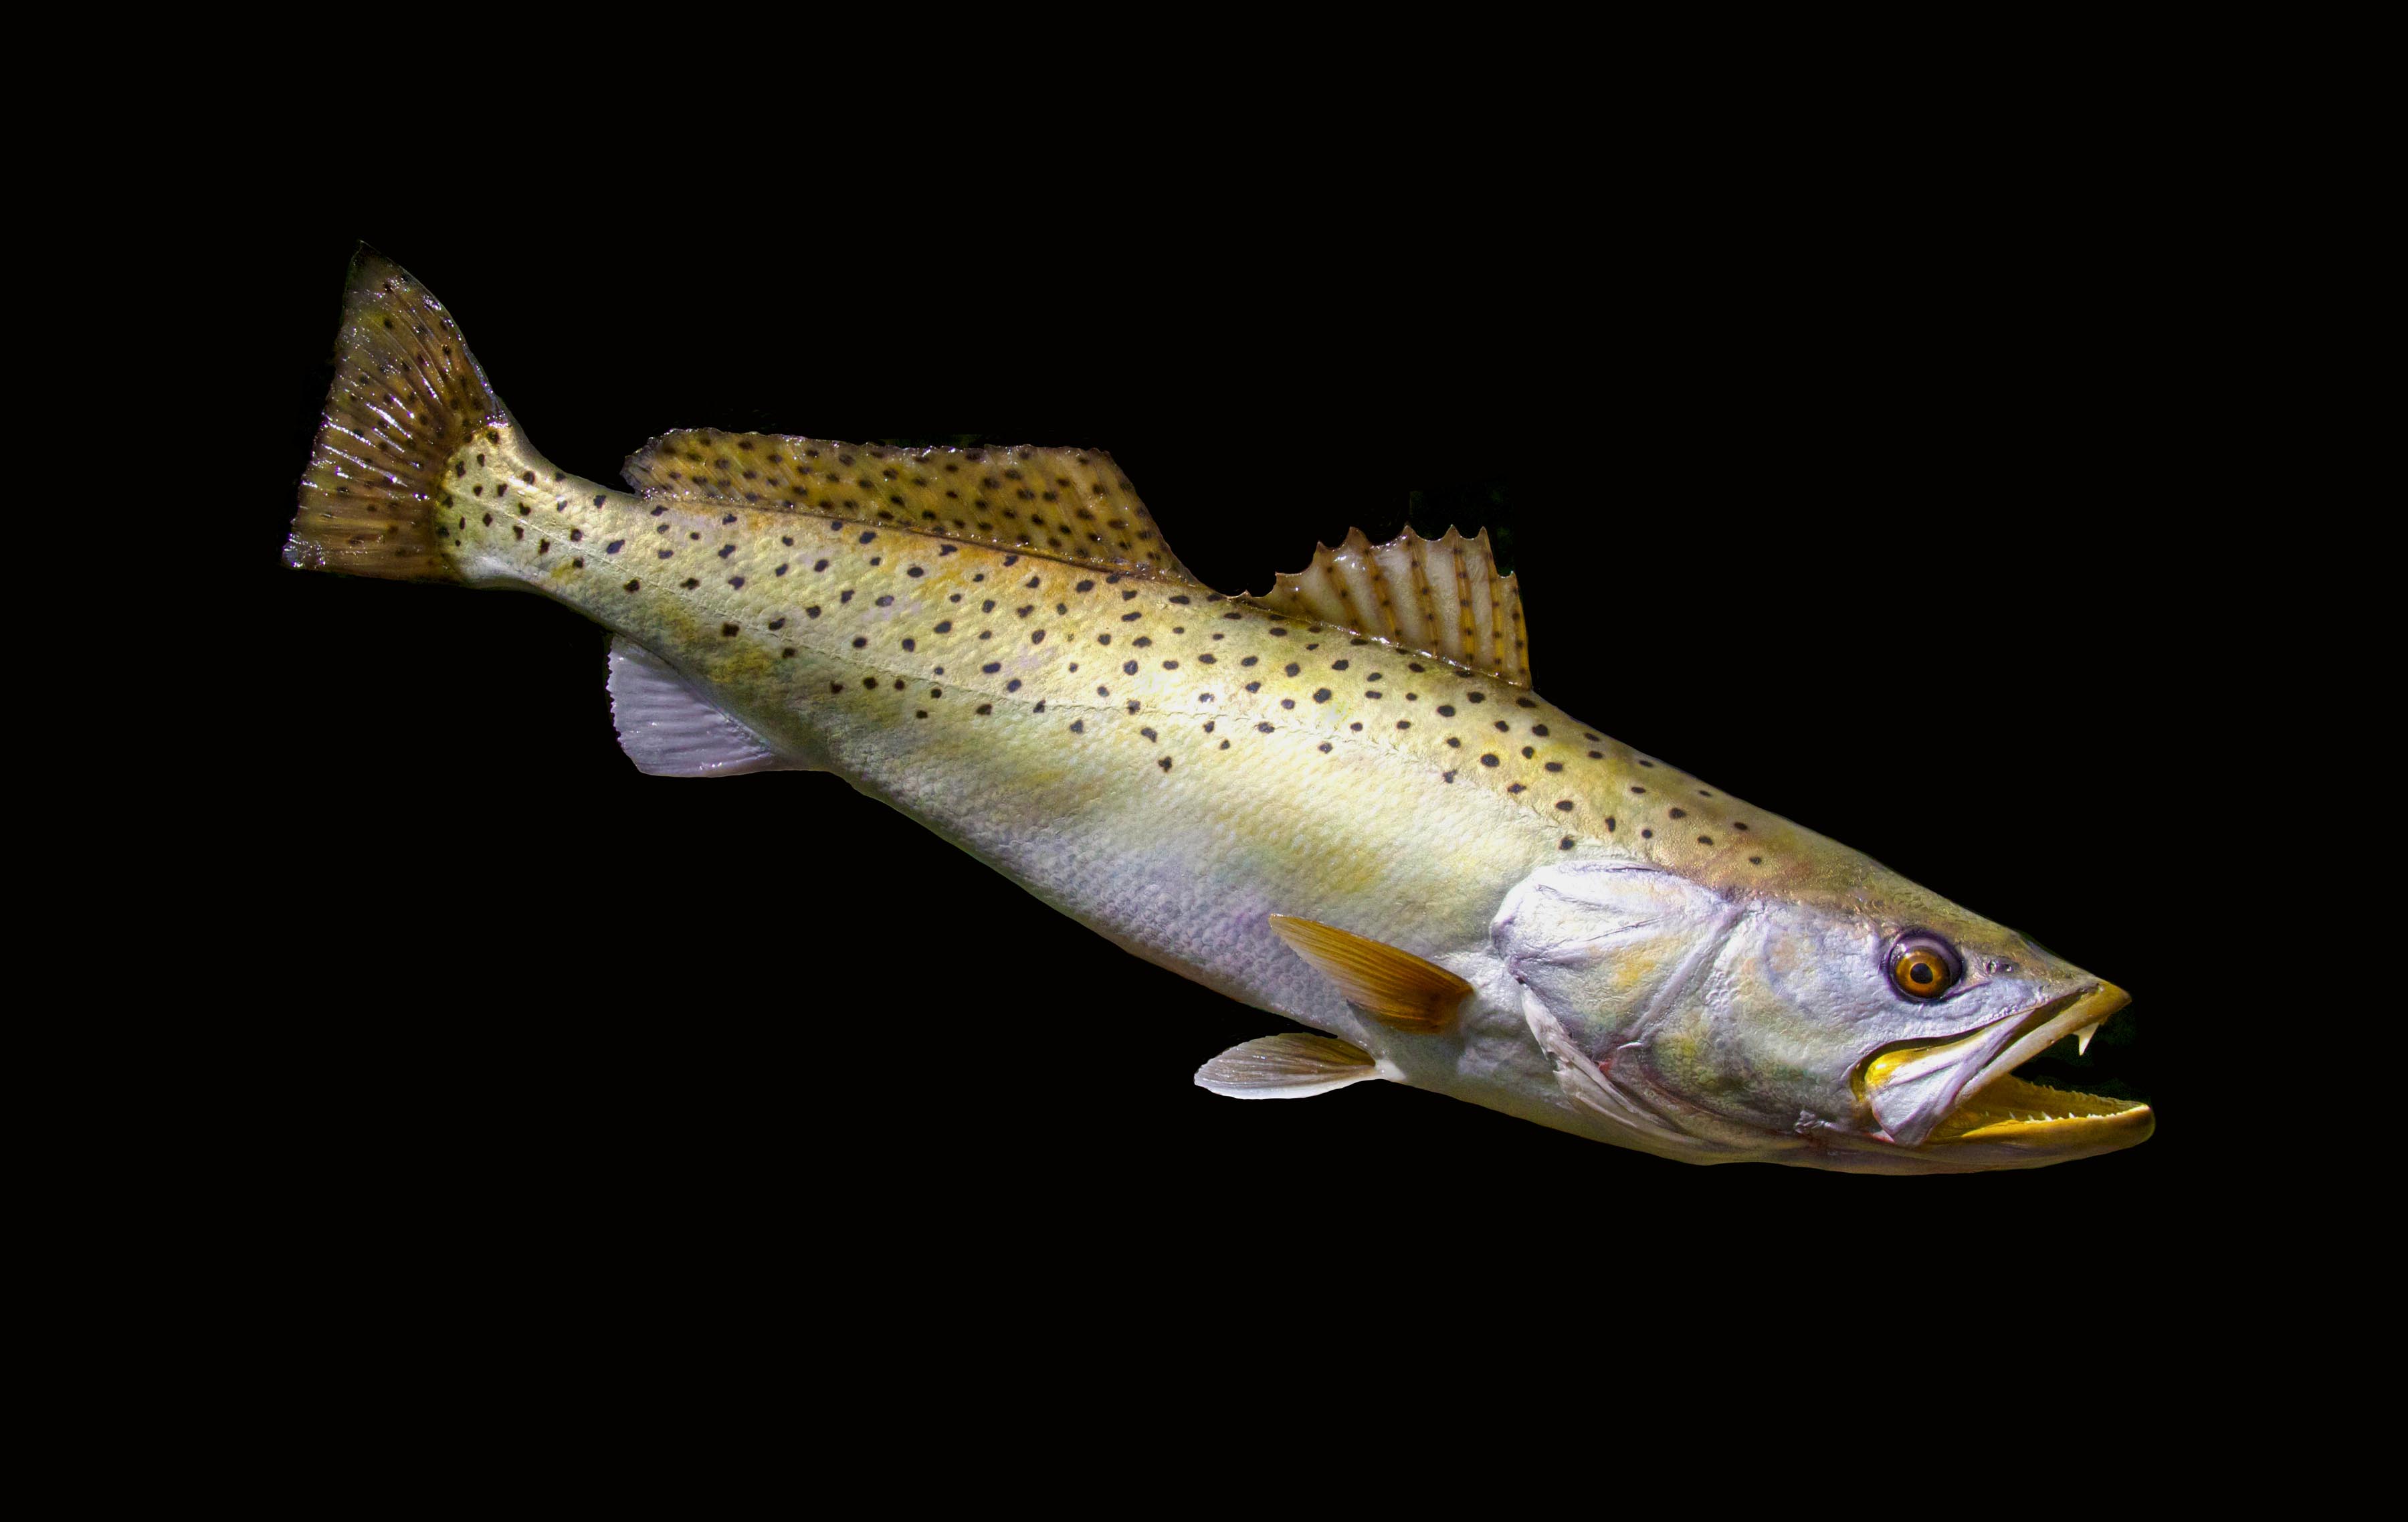 Spotted Sea Trout